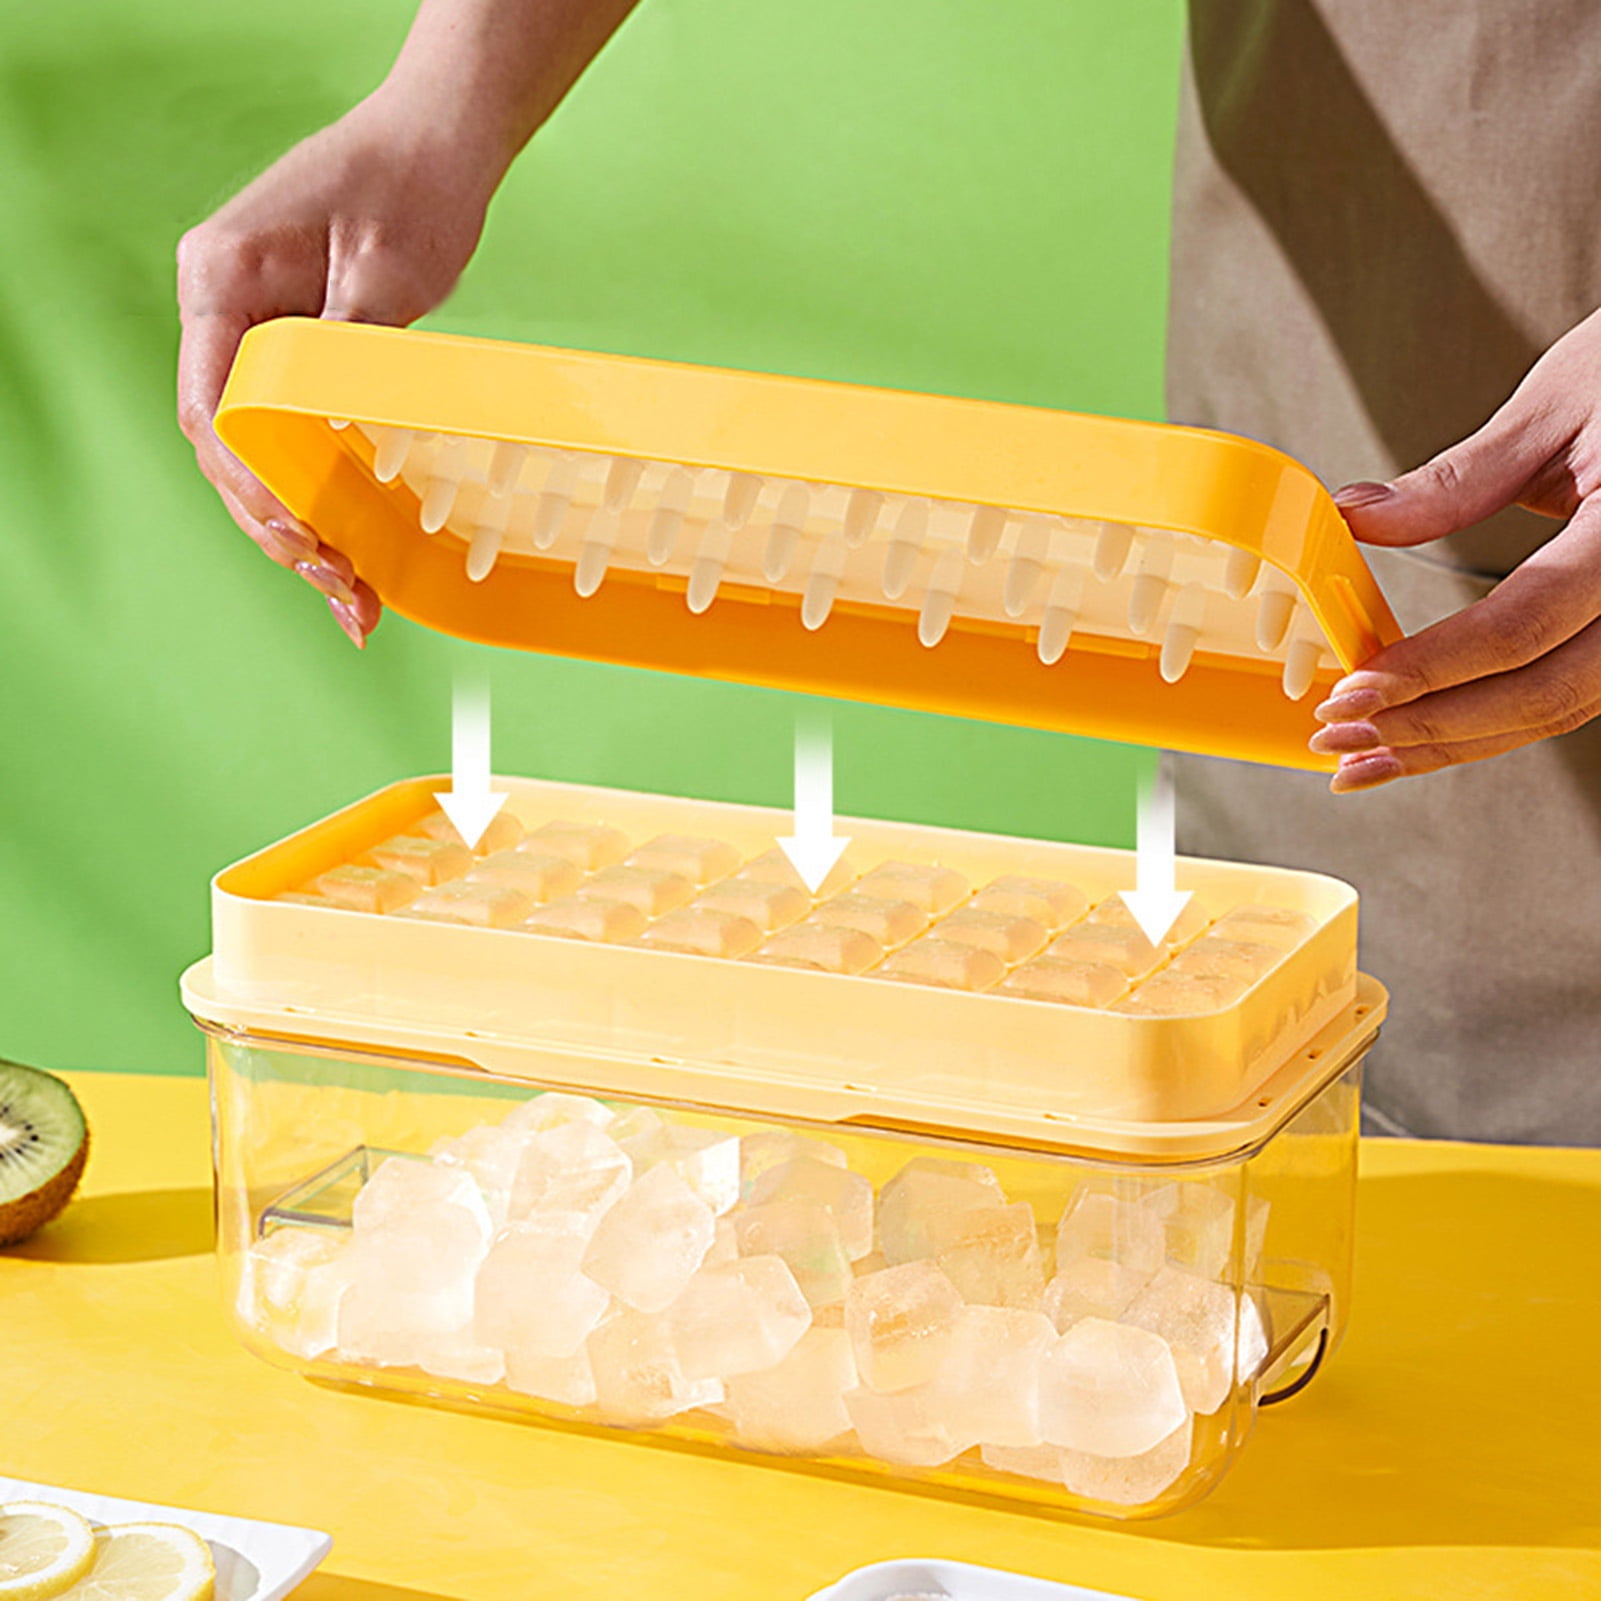 Details about   2x CUBED ICE Maker Large Cube Square Tray Molds Whiskey Ball Cocktails Silicone 